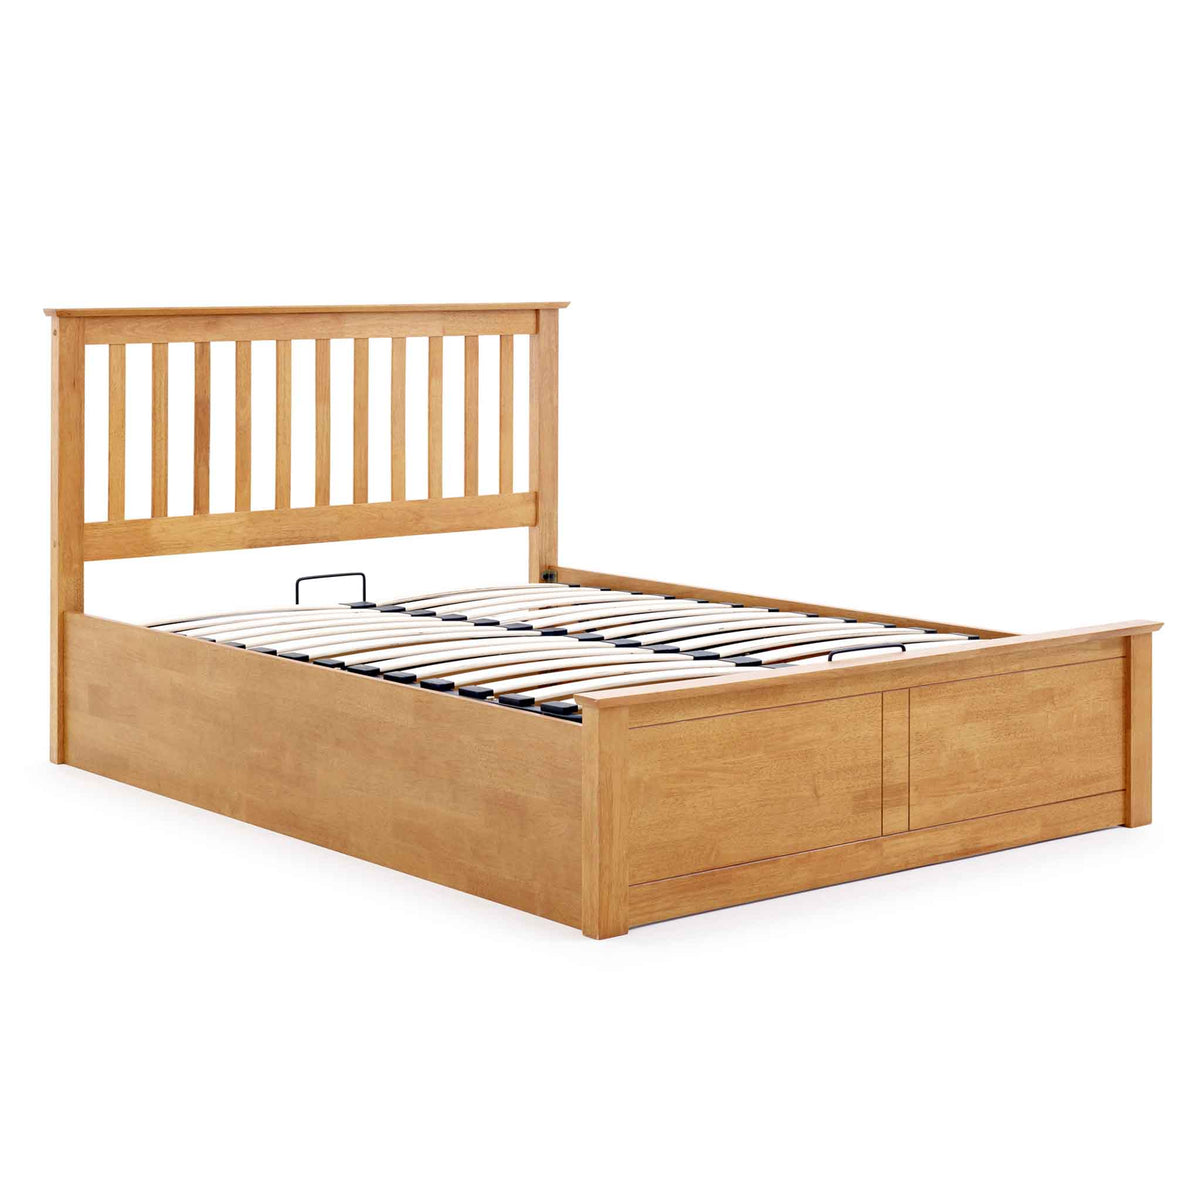 Trent Oak Wooden Ottoman Bed with sprung pine slats